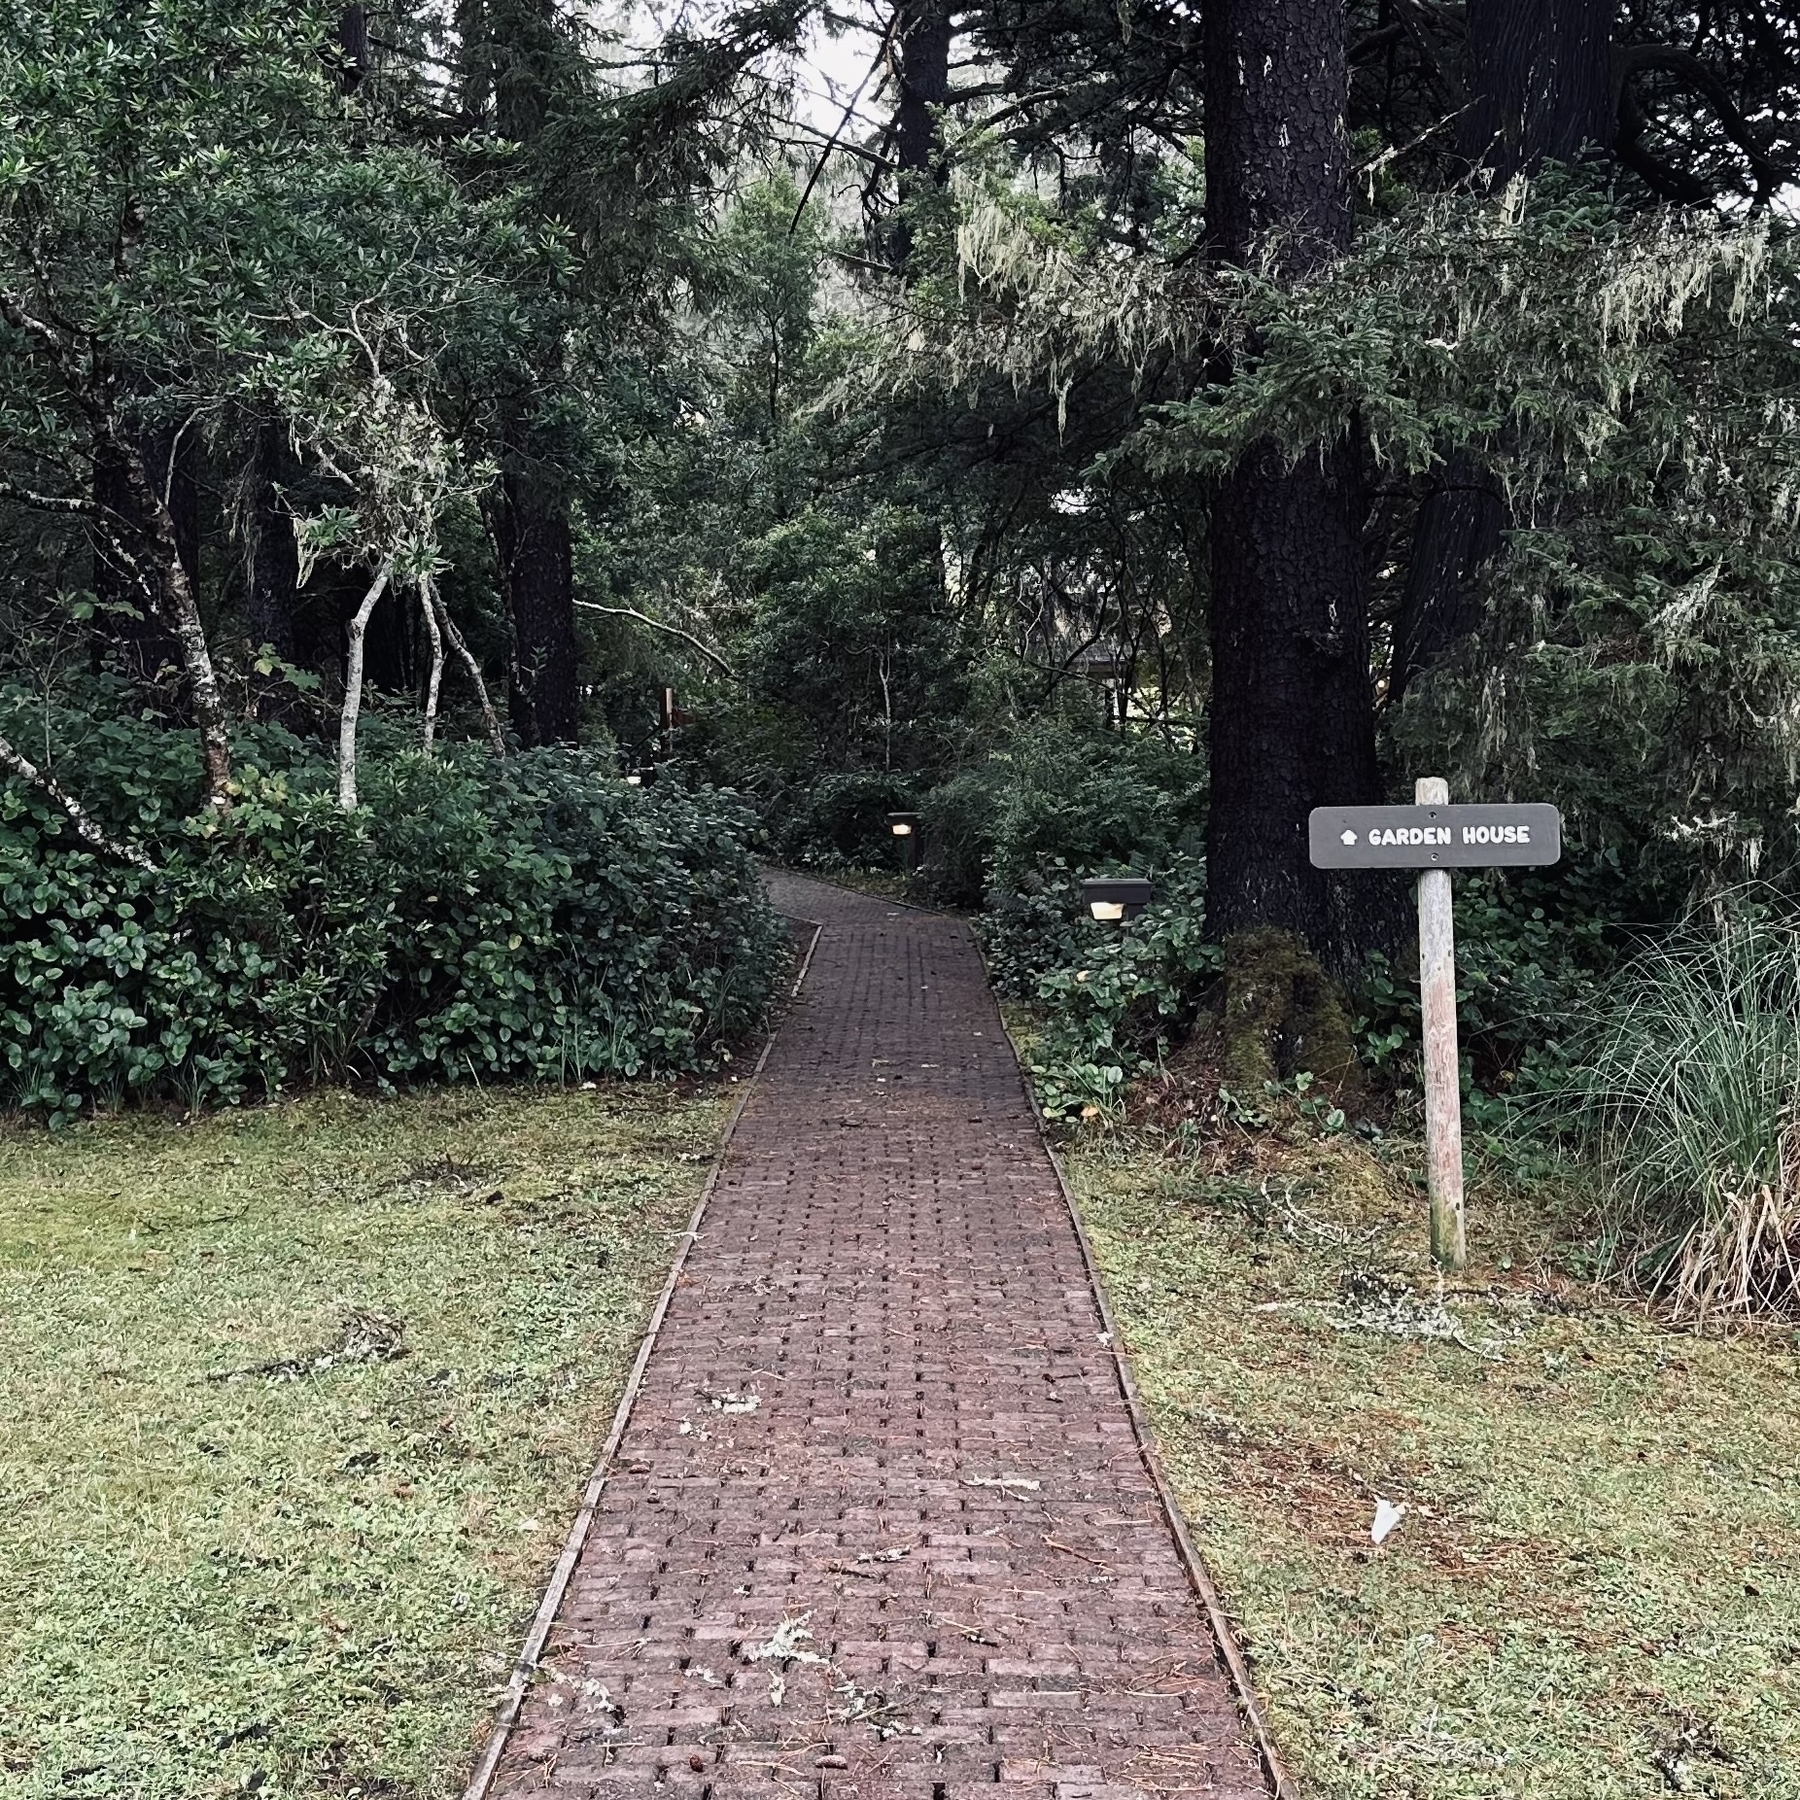 Path leading to the gardens with sign